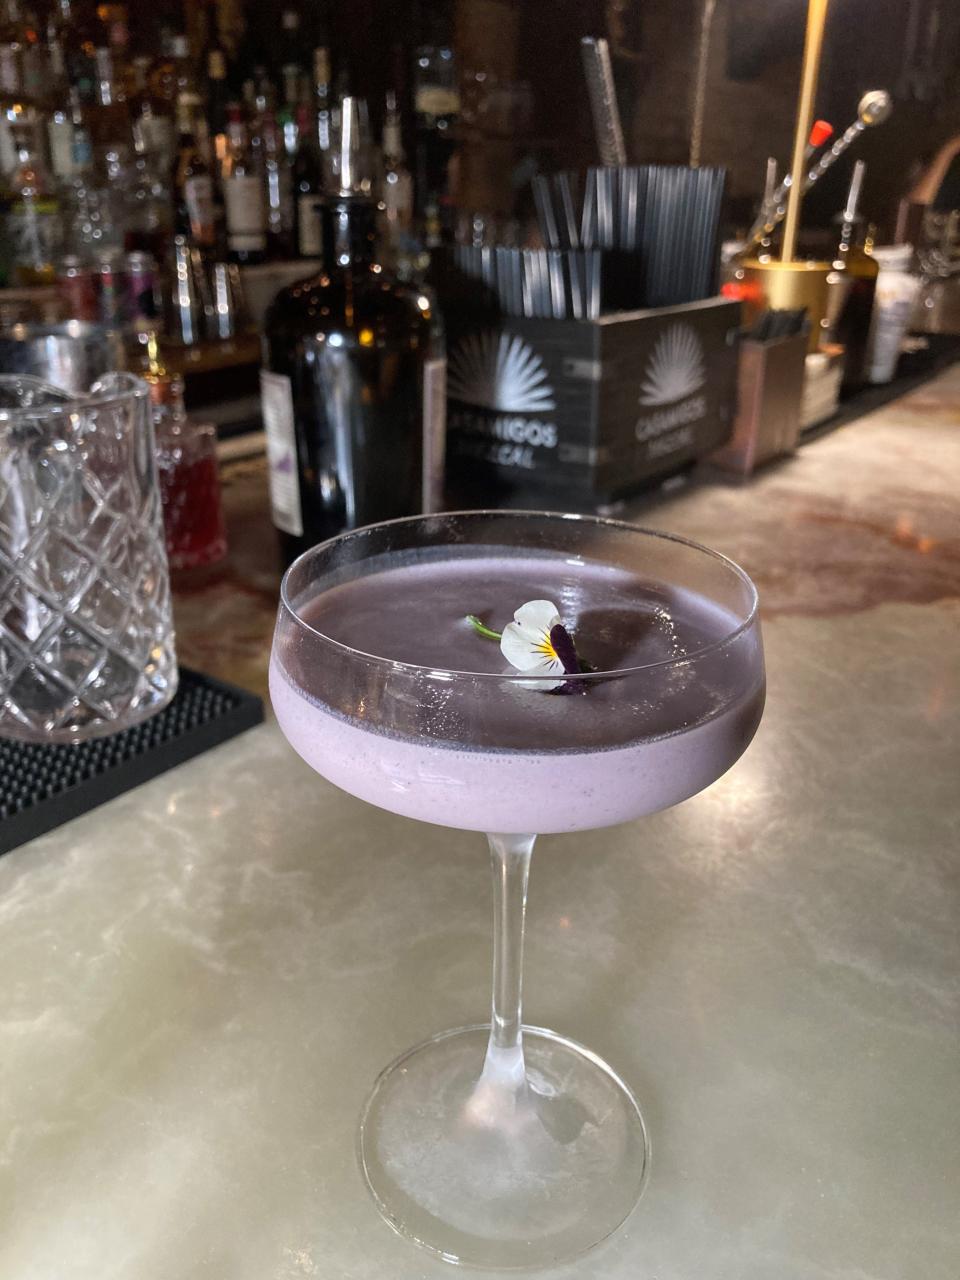 The Ho Ho Lohud at The Raconteur Bar & Kitchen in Pleasantville is made with made with muddled blackberries, 44° North Mountain Huckleberry Cream liquor, 44° North Mountain vodka, St. Germain and Monkey 47 gin. Photographed Dec. 6, 2022